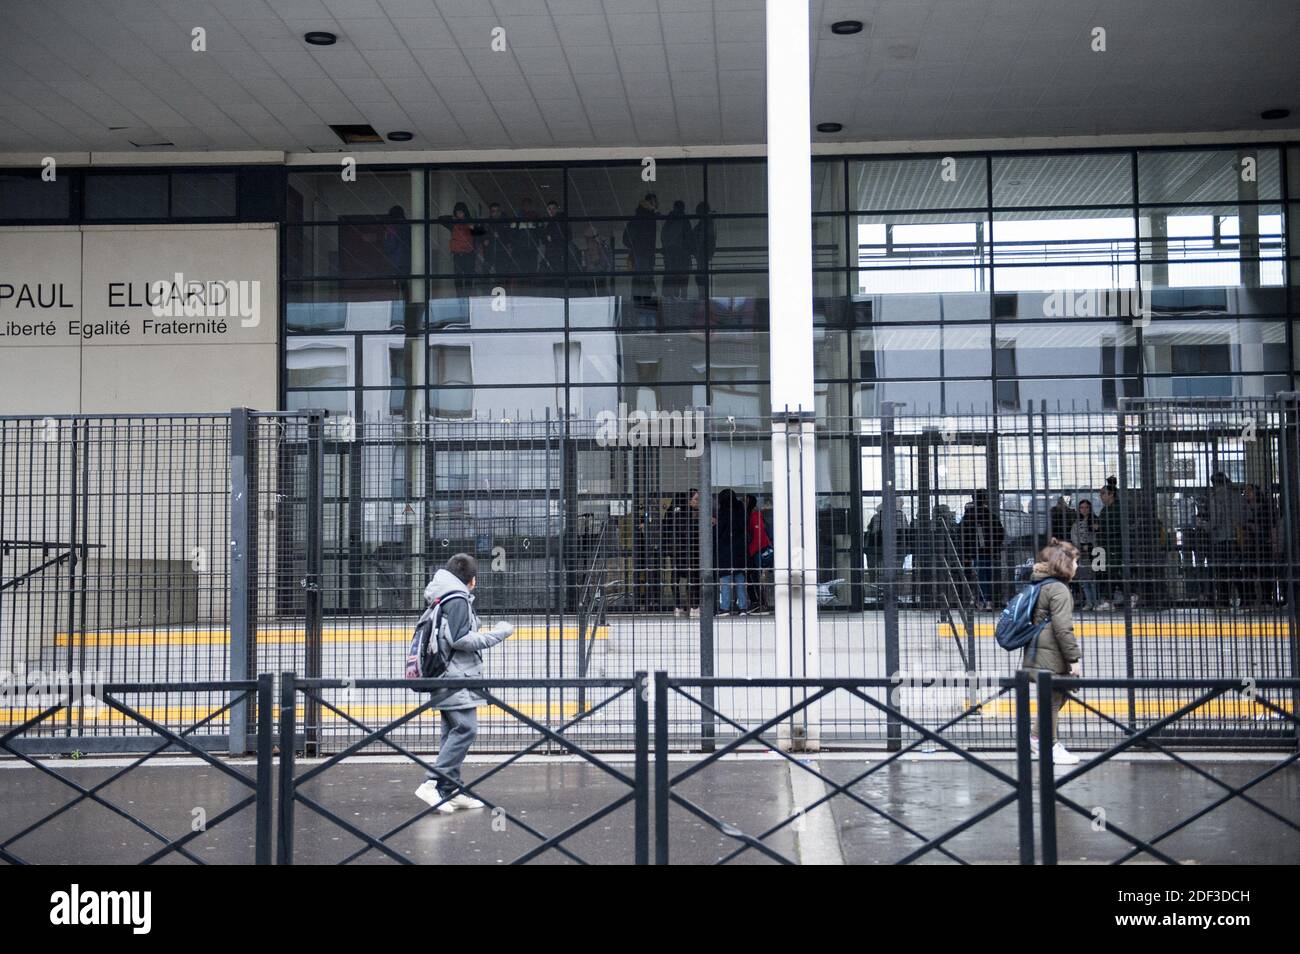 The Collège Paul-Eluard in Montreuil seine saint denis ile de france where a pupil is infected with the coronavirus Covid-19 and was hospitalized in Necker. The college is still open, Montreuil, France on 2 march, 2020 Photo by Magali Cohen/ABACAPRESS.COM Stock Photo